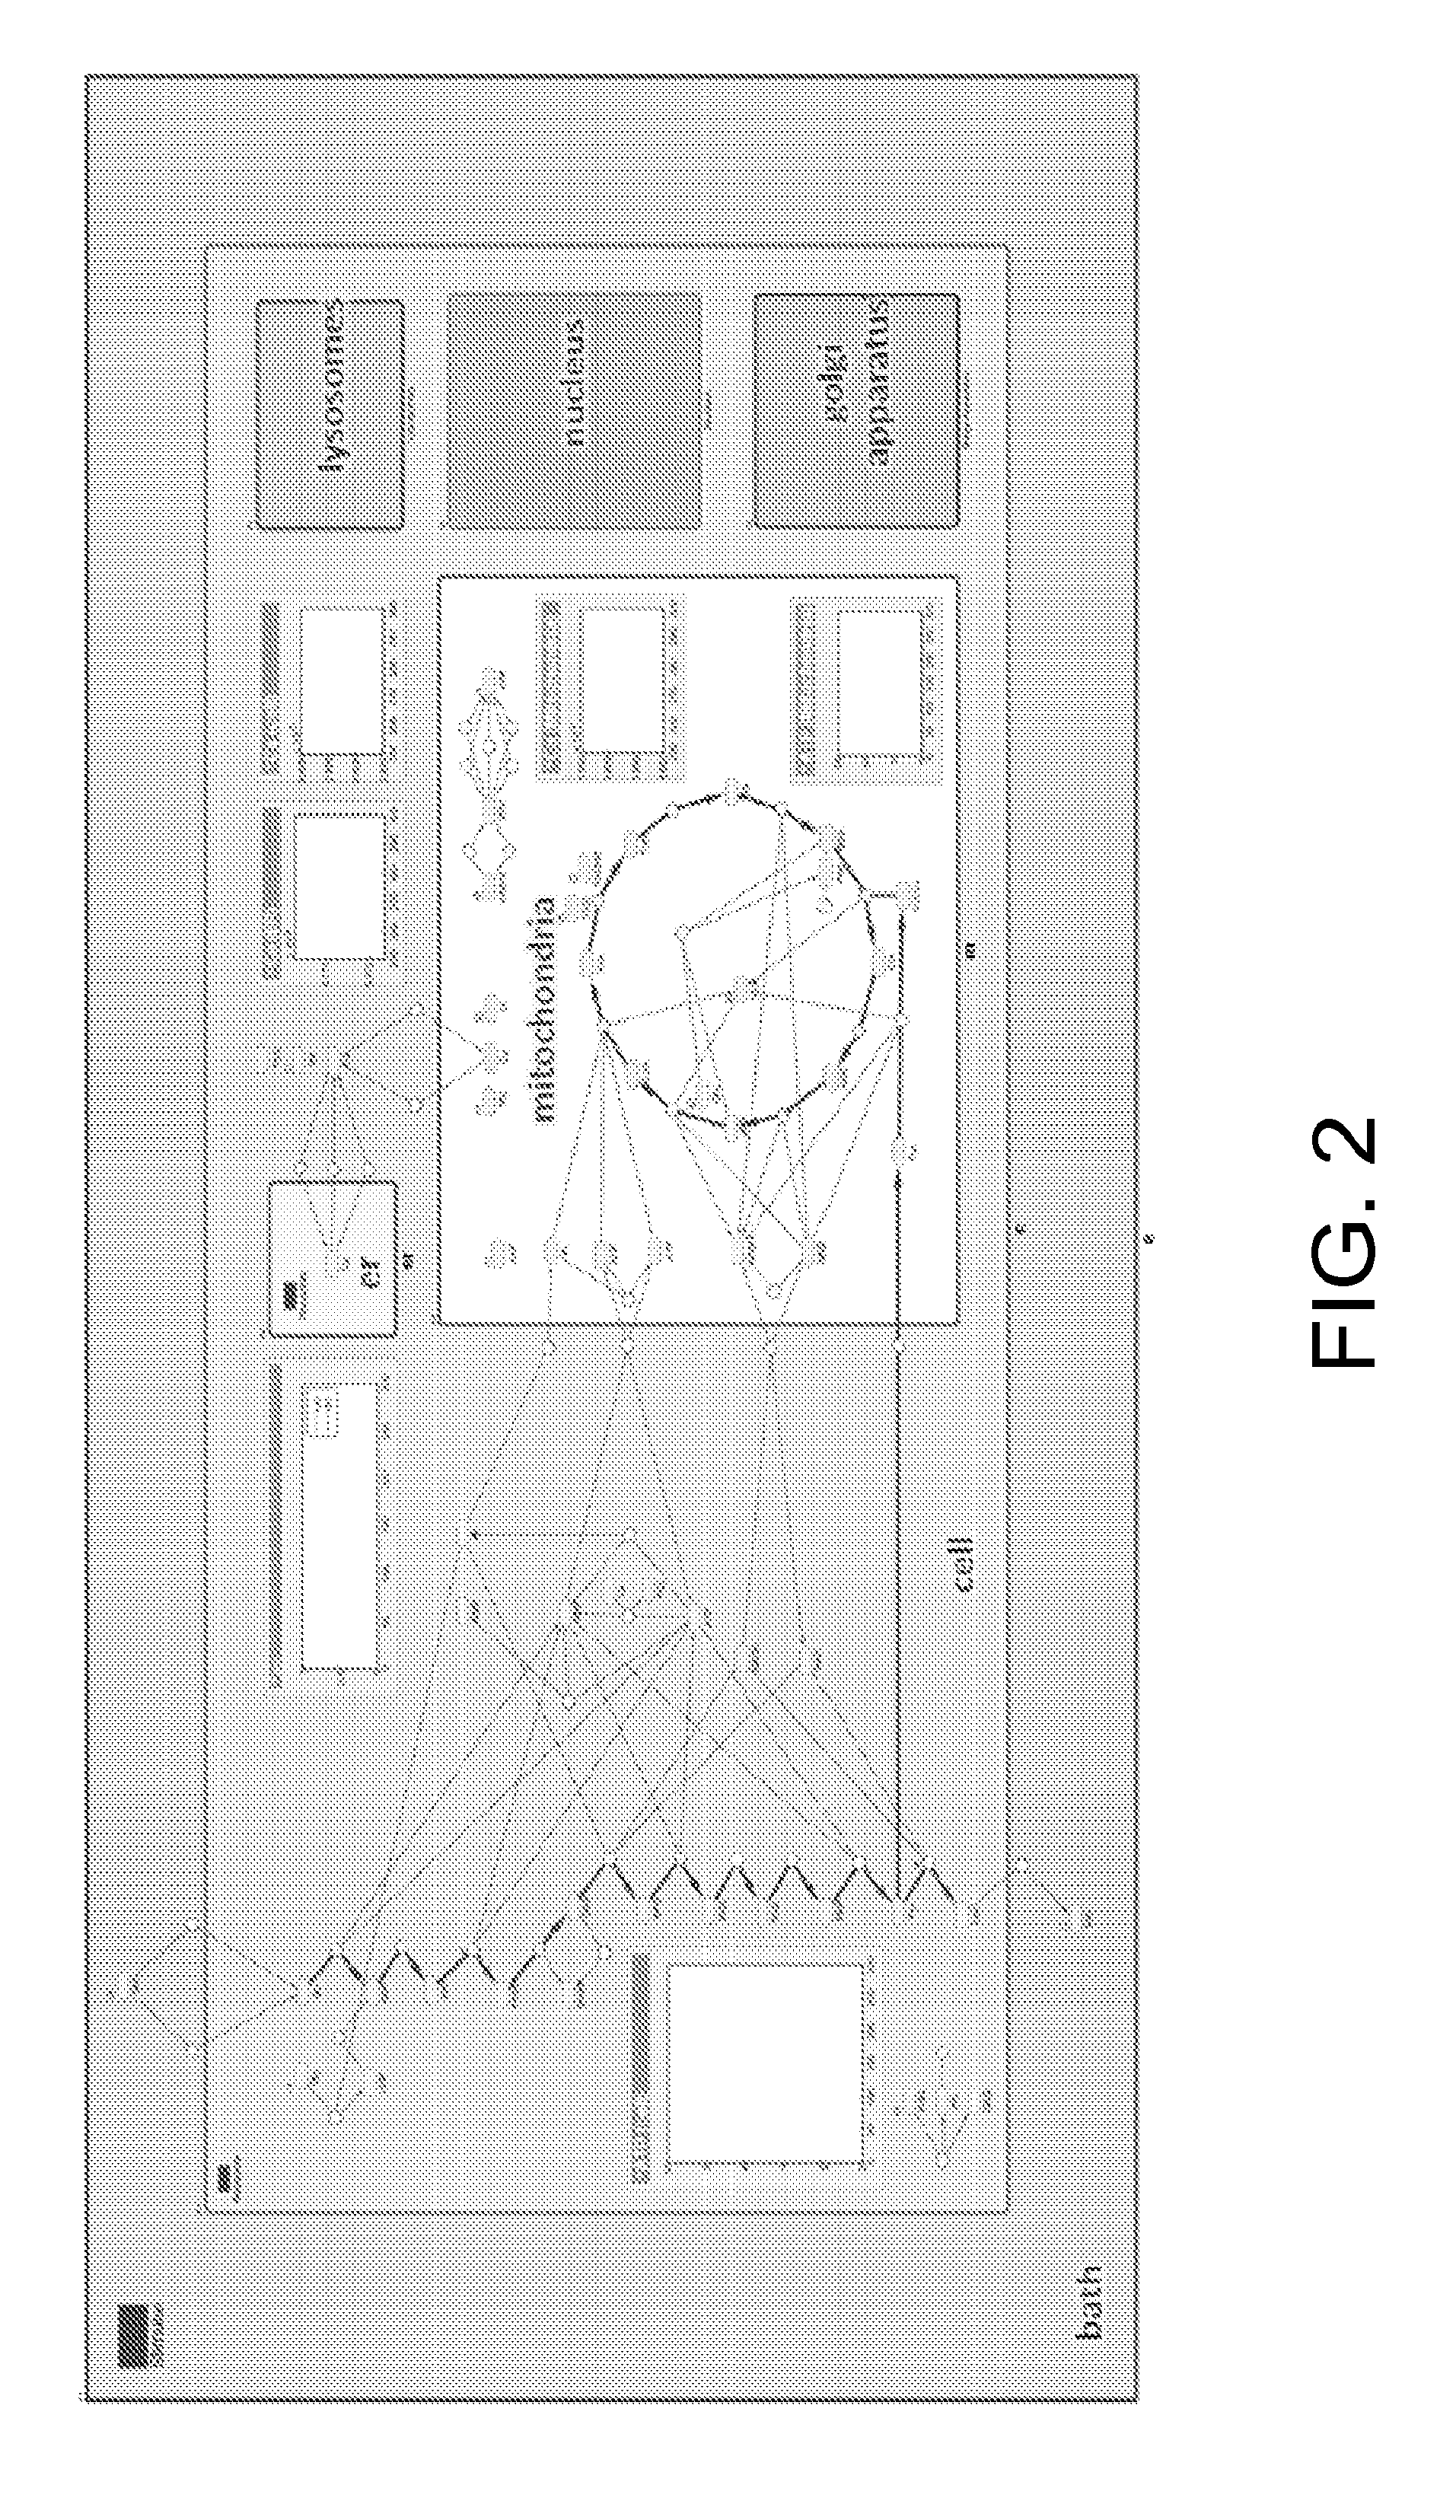 Model and Methods for Identifying Points of Action in Electrically Active Cells